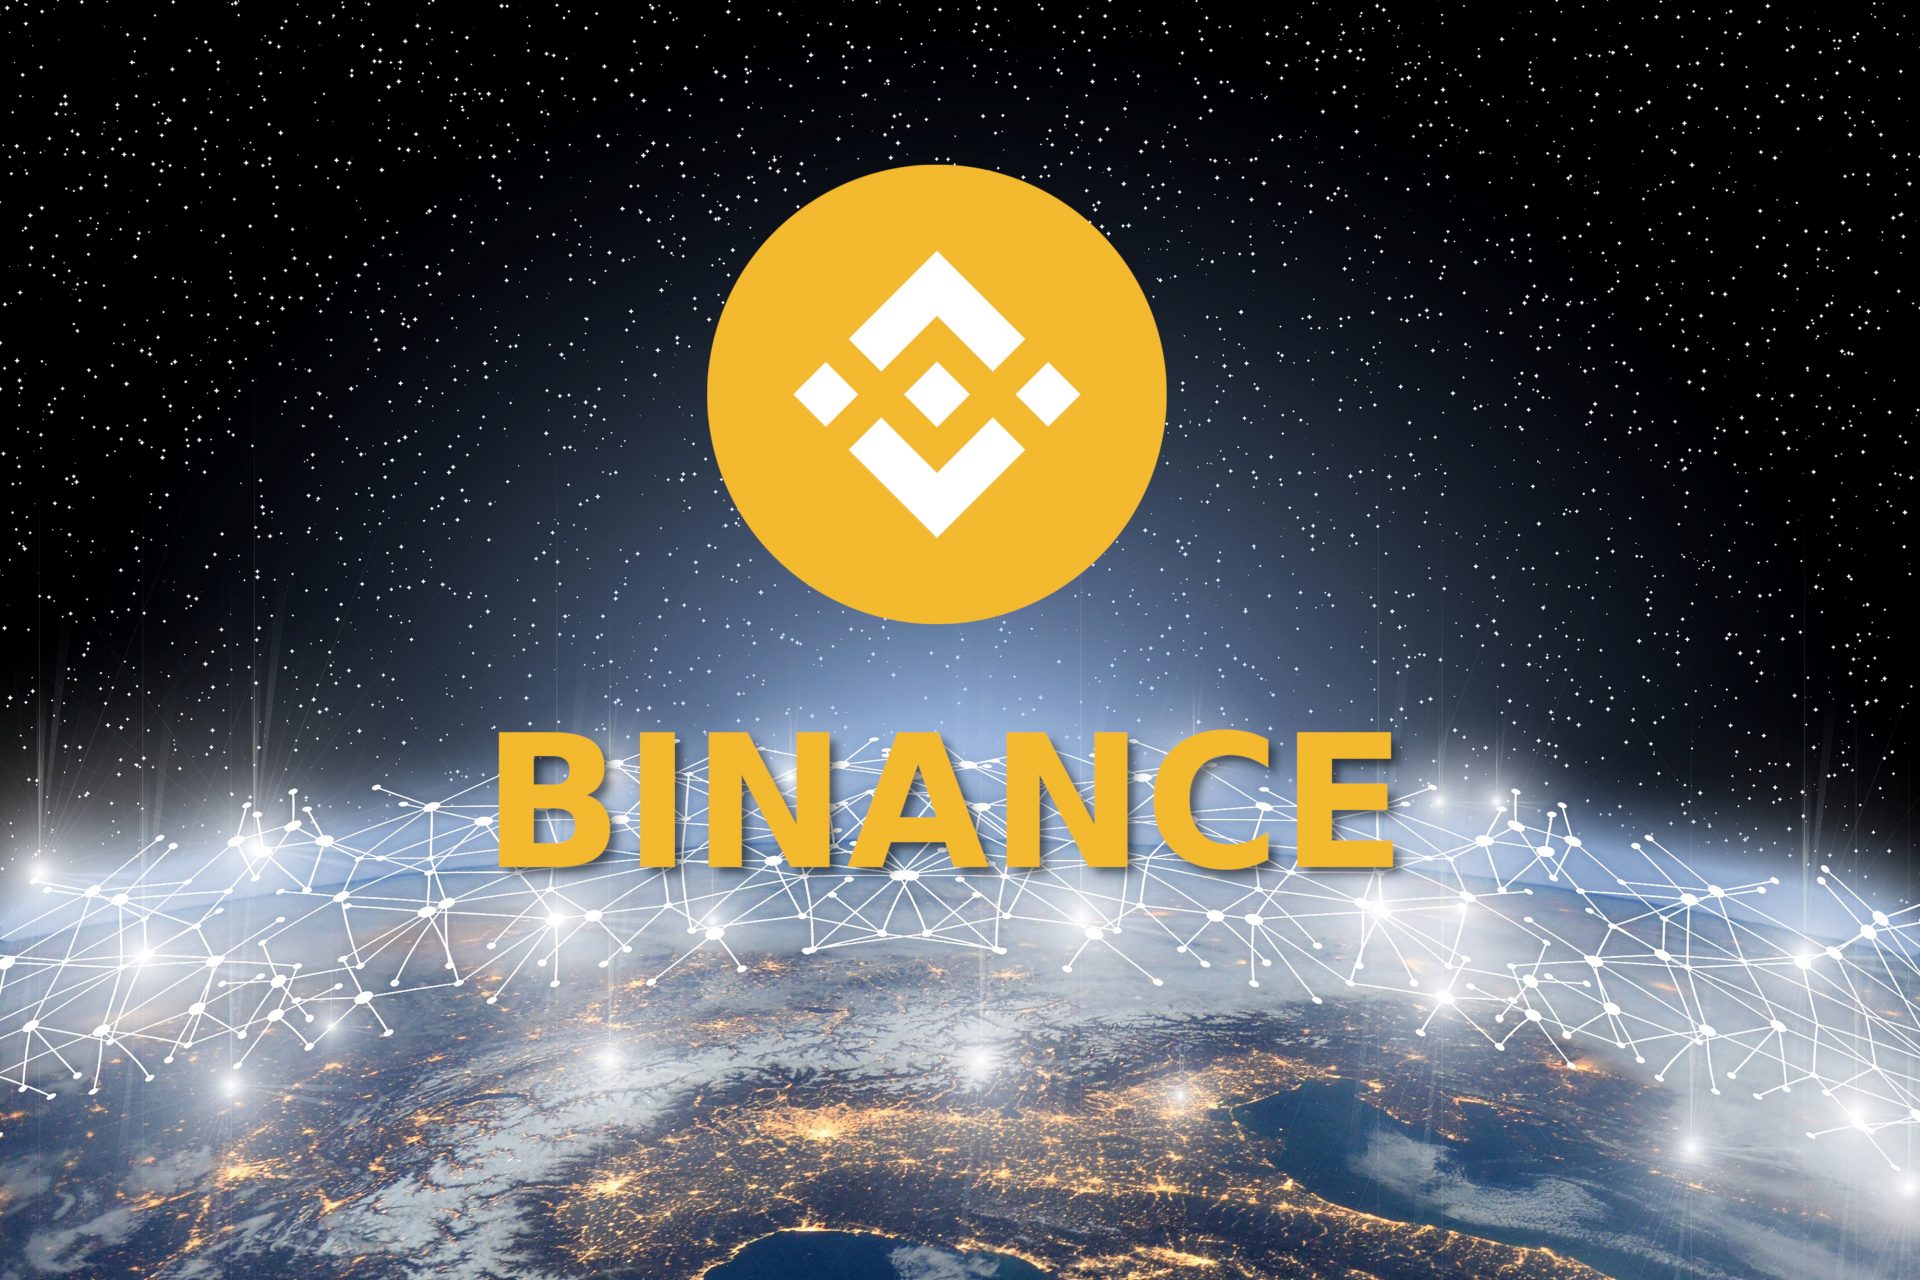 EFCC begins investigation as court orders Binance to release Nigeria traders' data